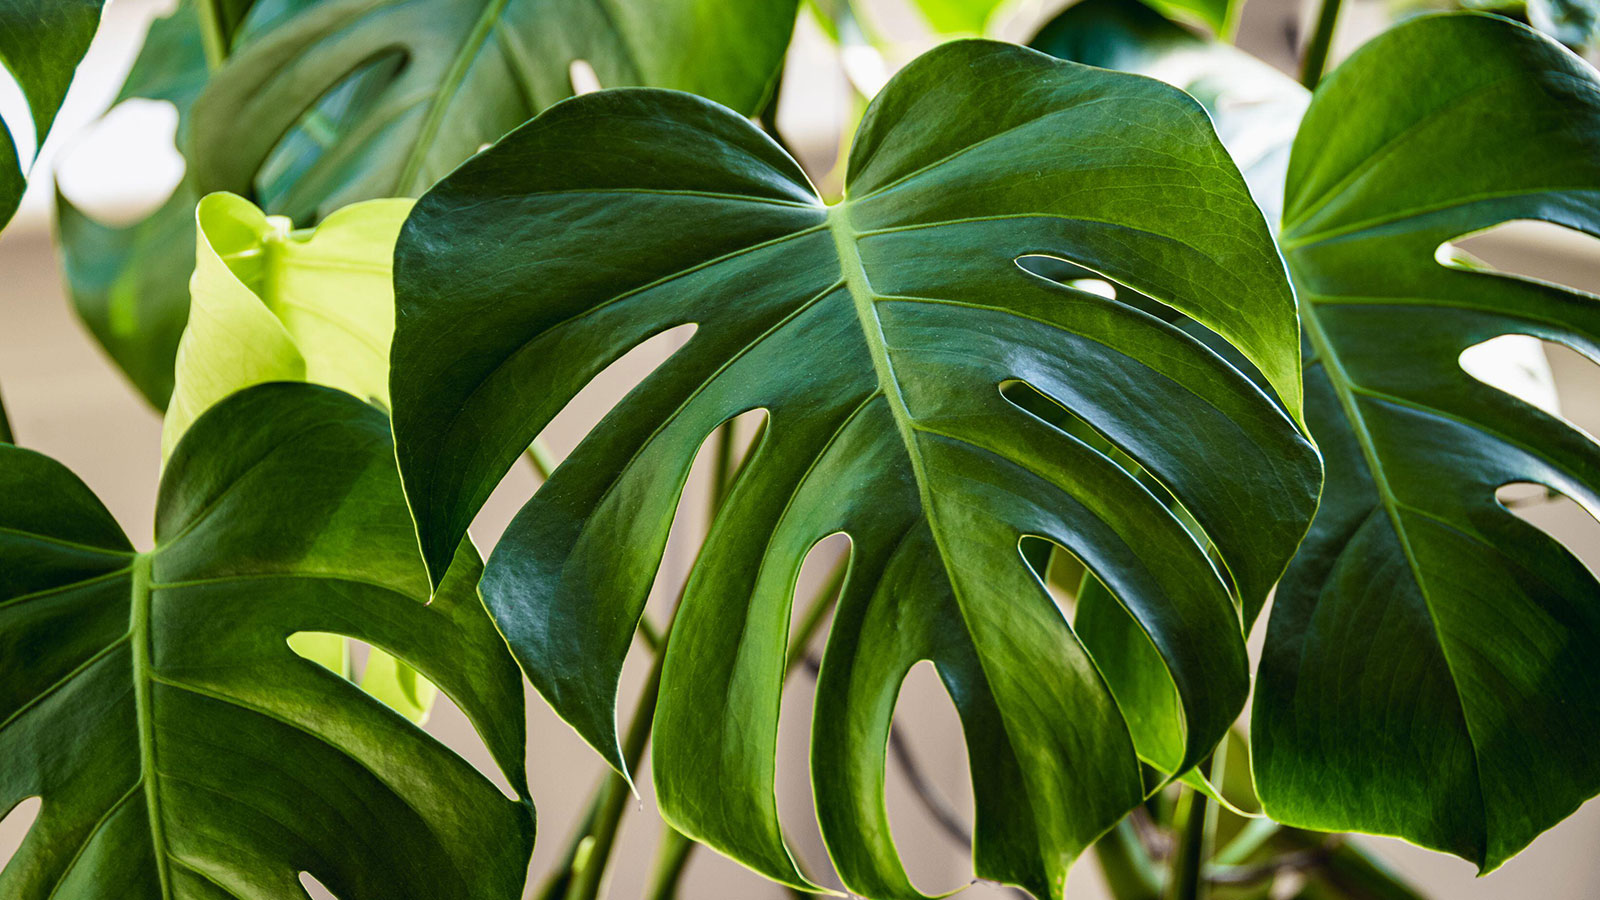 8. Care for your repotted monstera